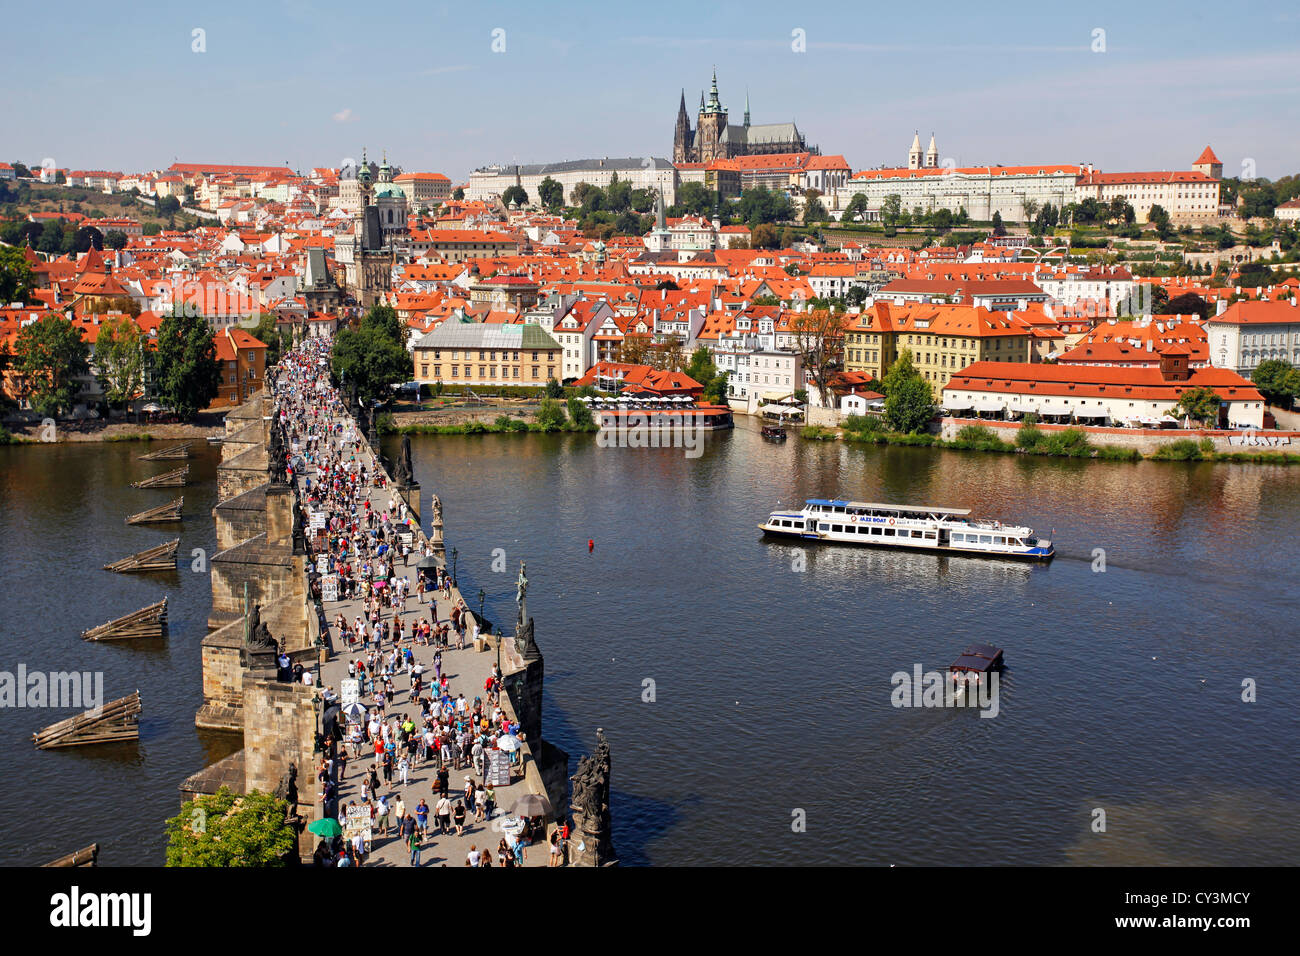 St. Vitus Cathedral and Prague Castle skyline with the Charles Bridge and Vtlava River in Prague, Czech Republic Stock Photo